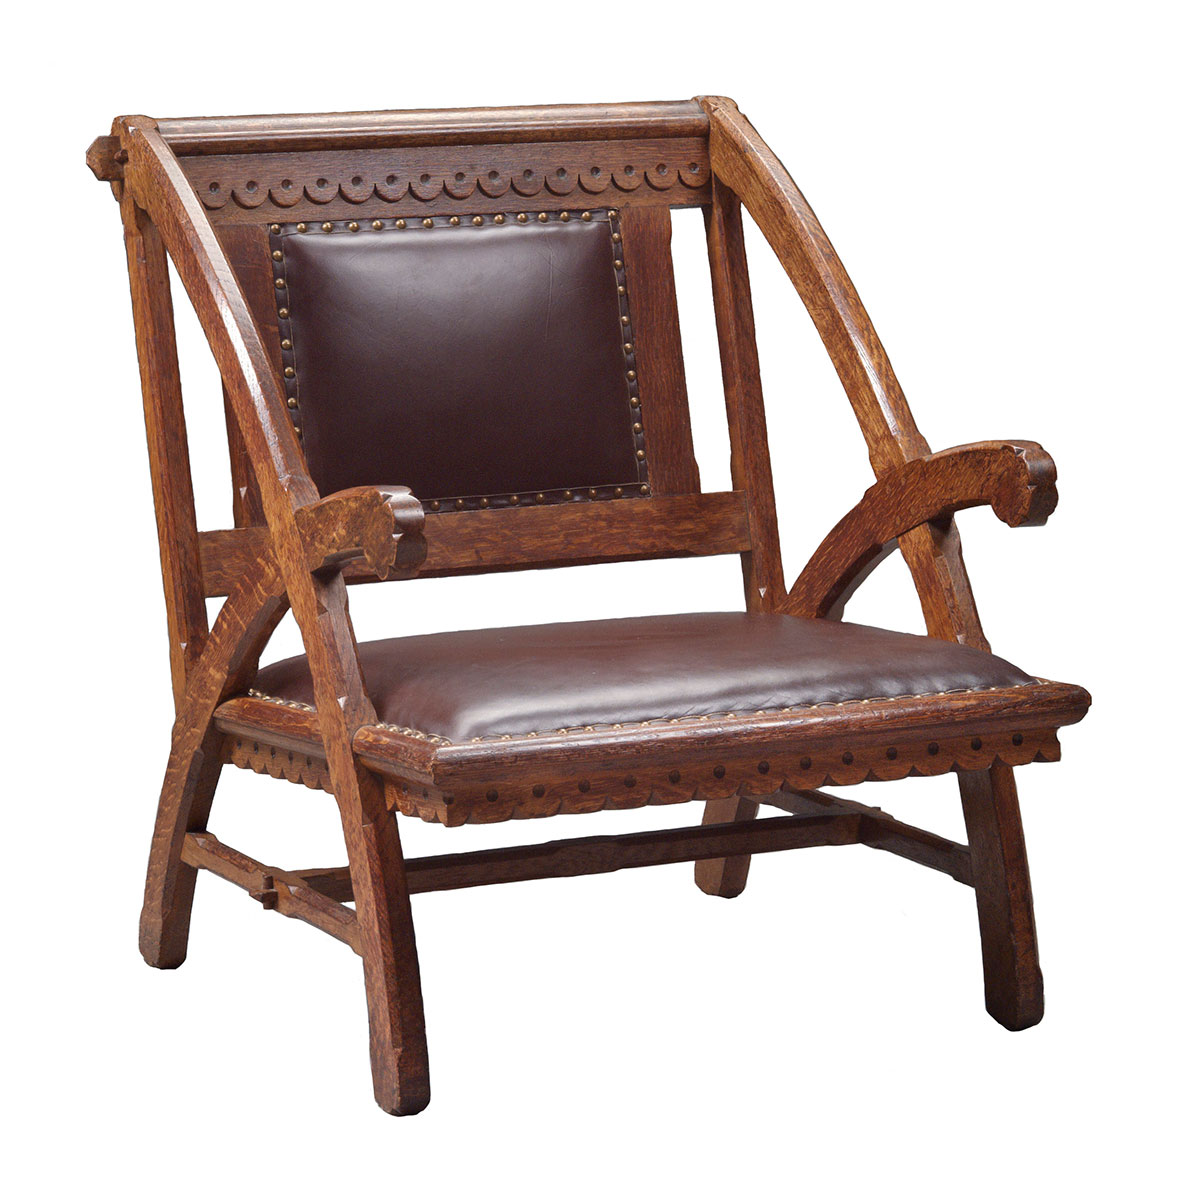 Cute Armchair for the Woburn Public Library arts and crafts movement furniture